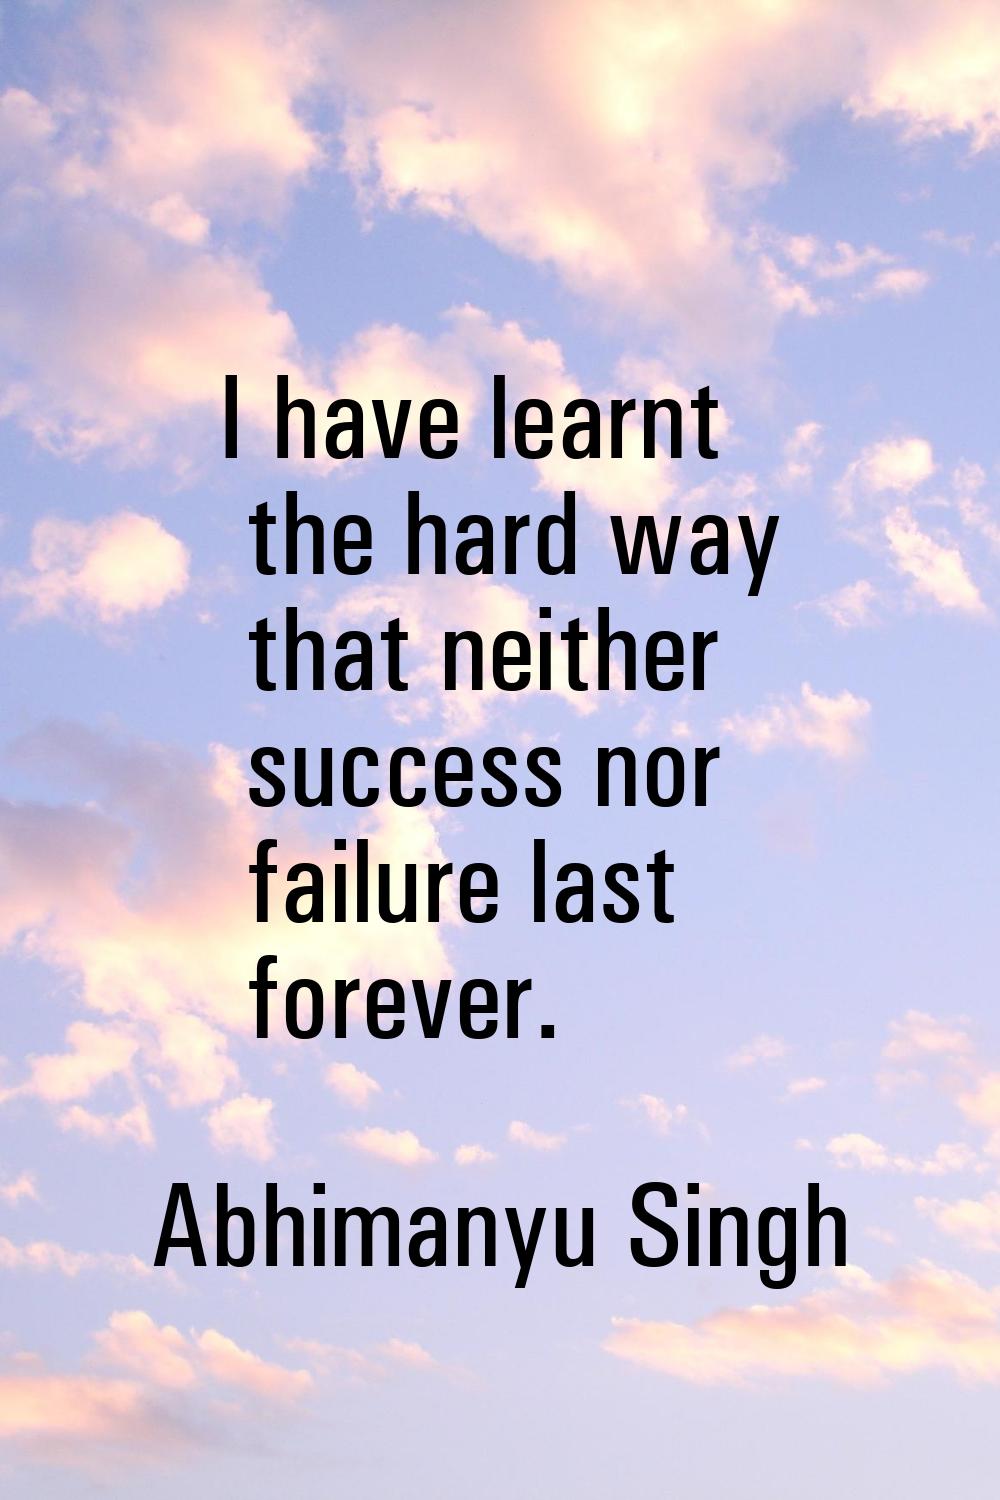 I have learnt the hard way that neither success nor failure last forever.